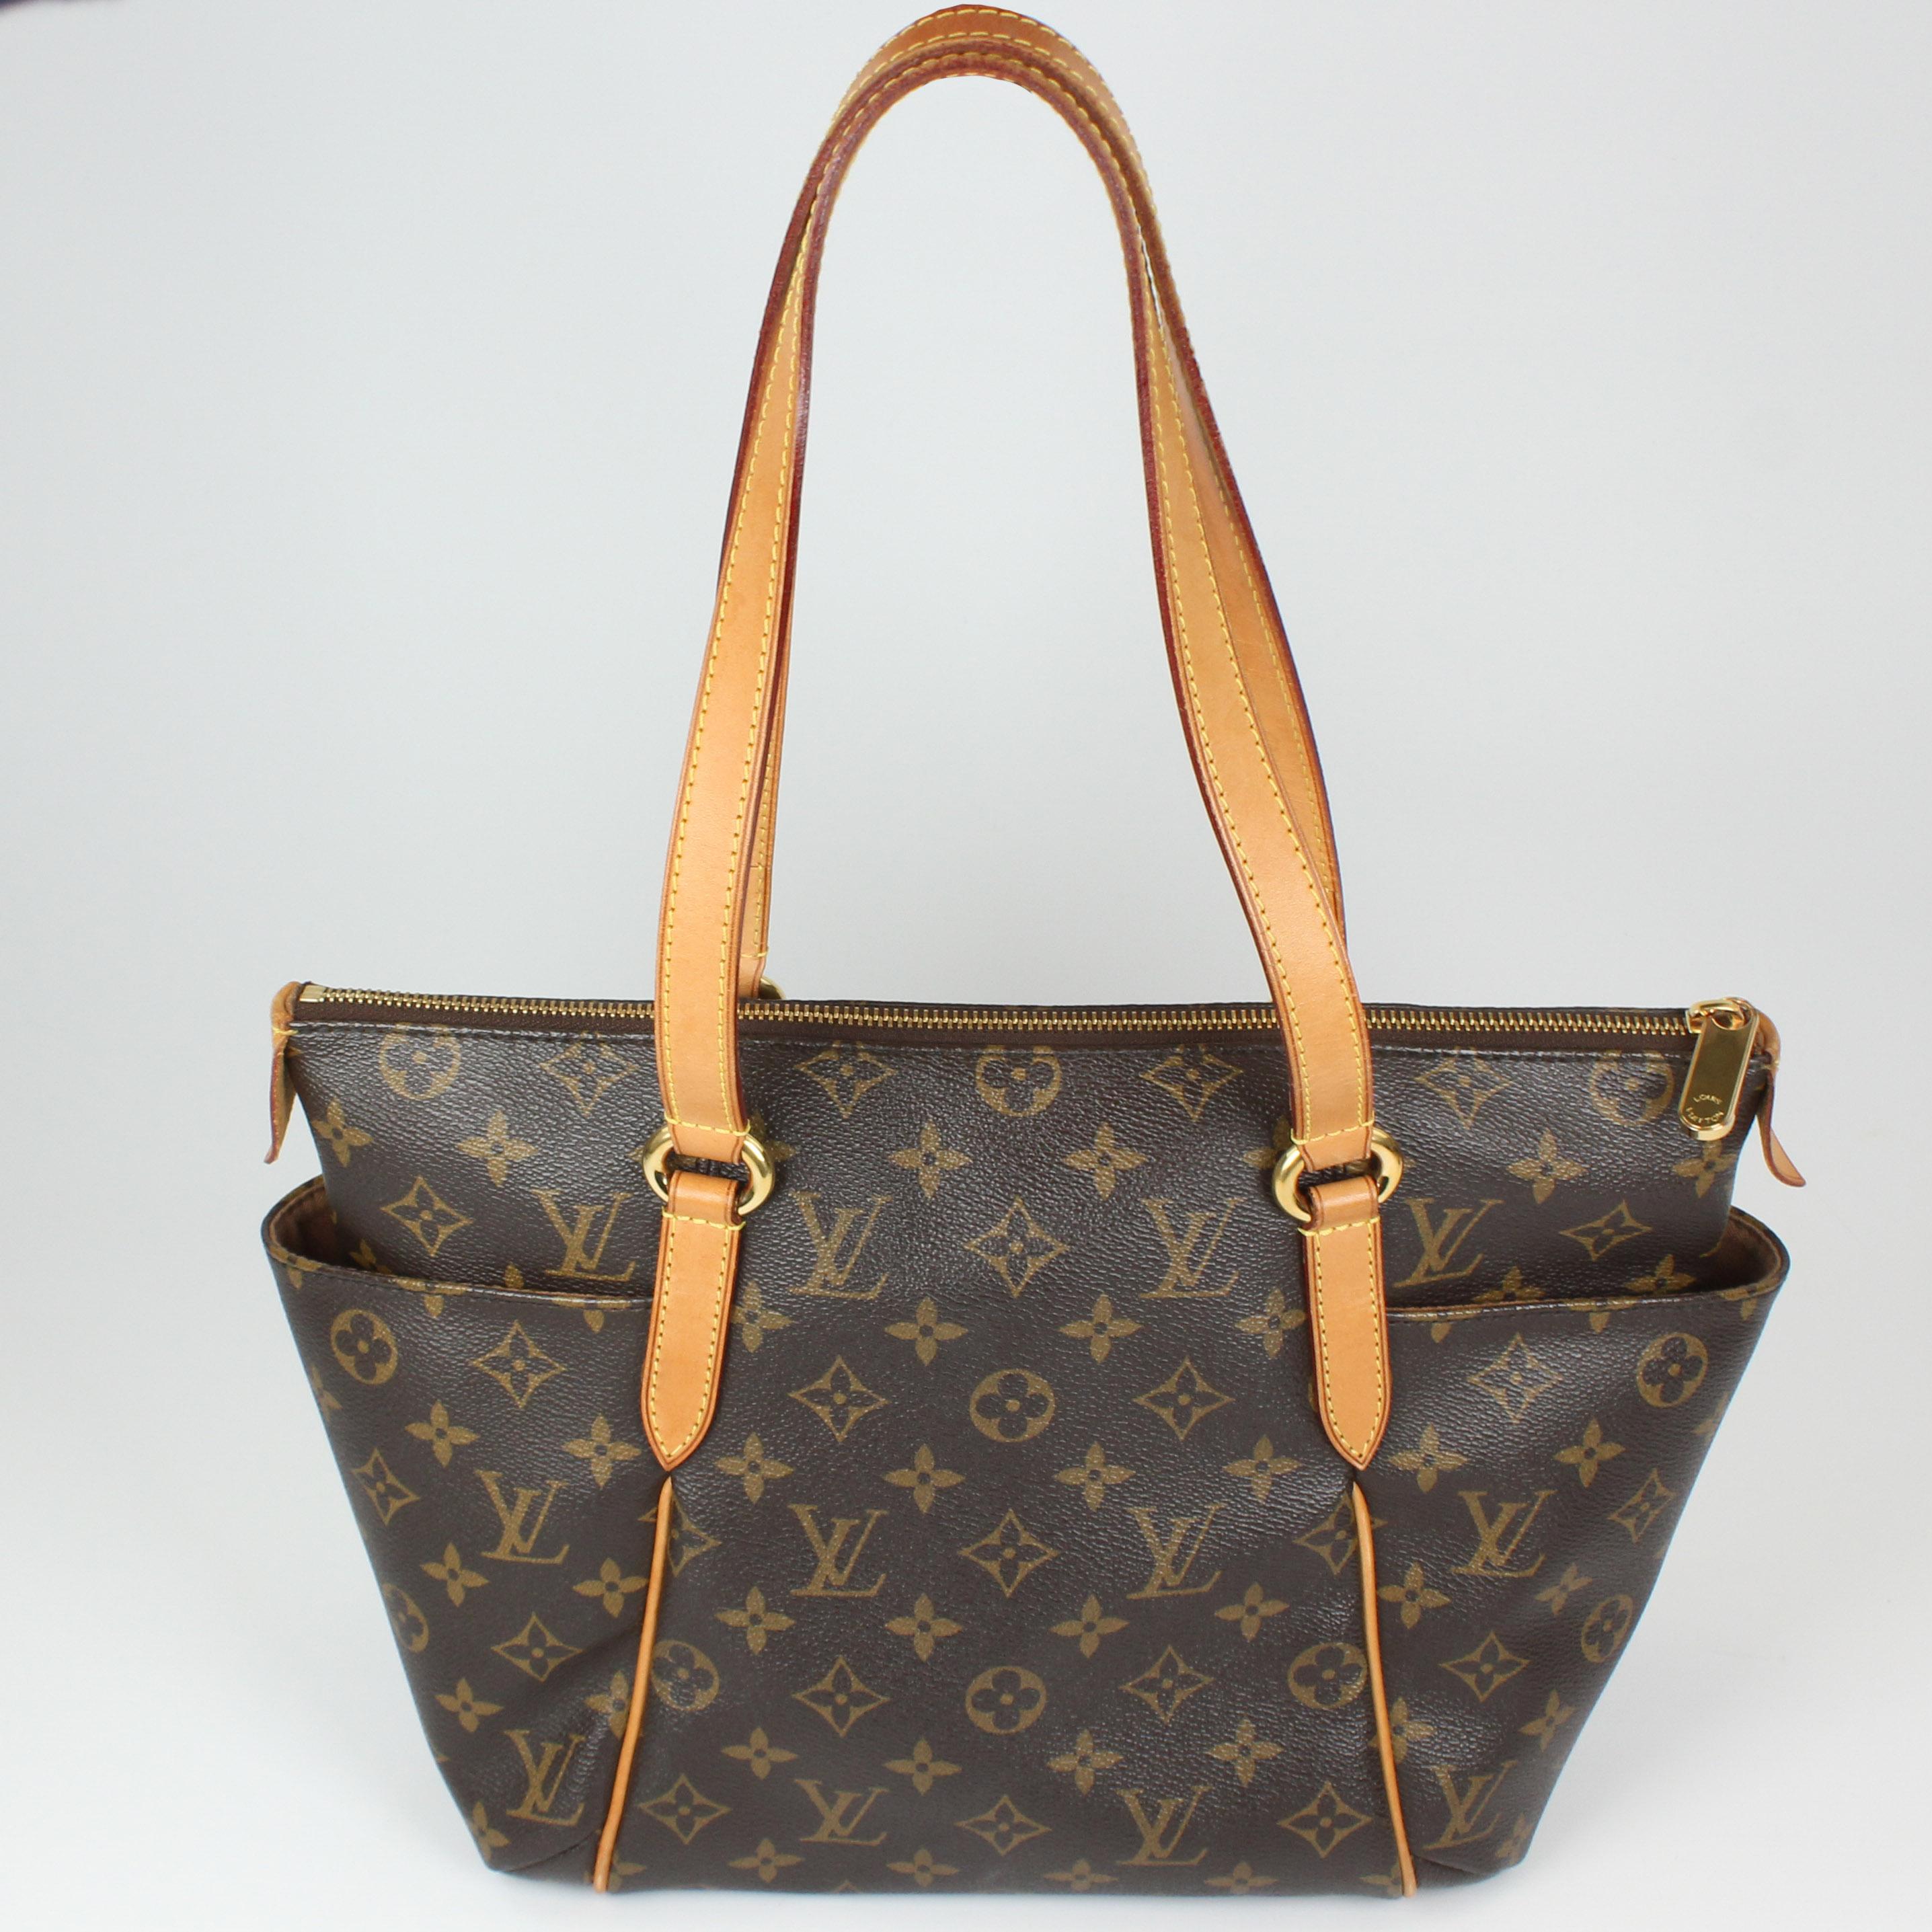 Women's Louis Vuitton Totally Handbag in Leather For Sale